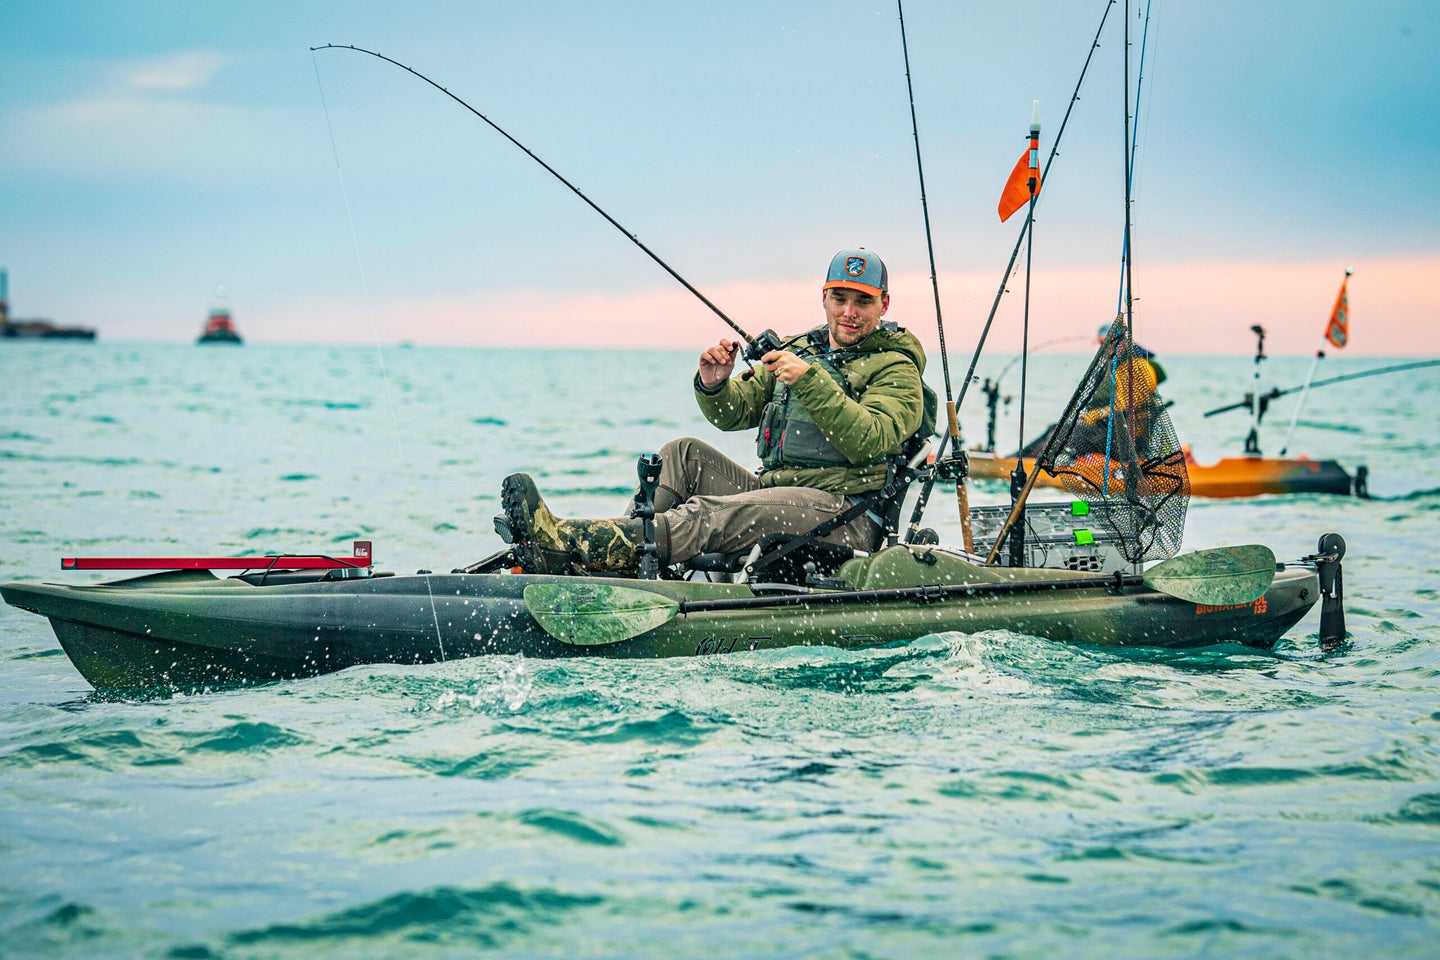 man fishes from kayak in ocean